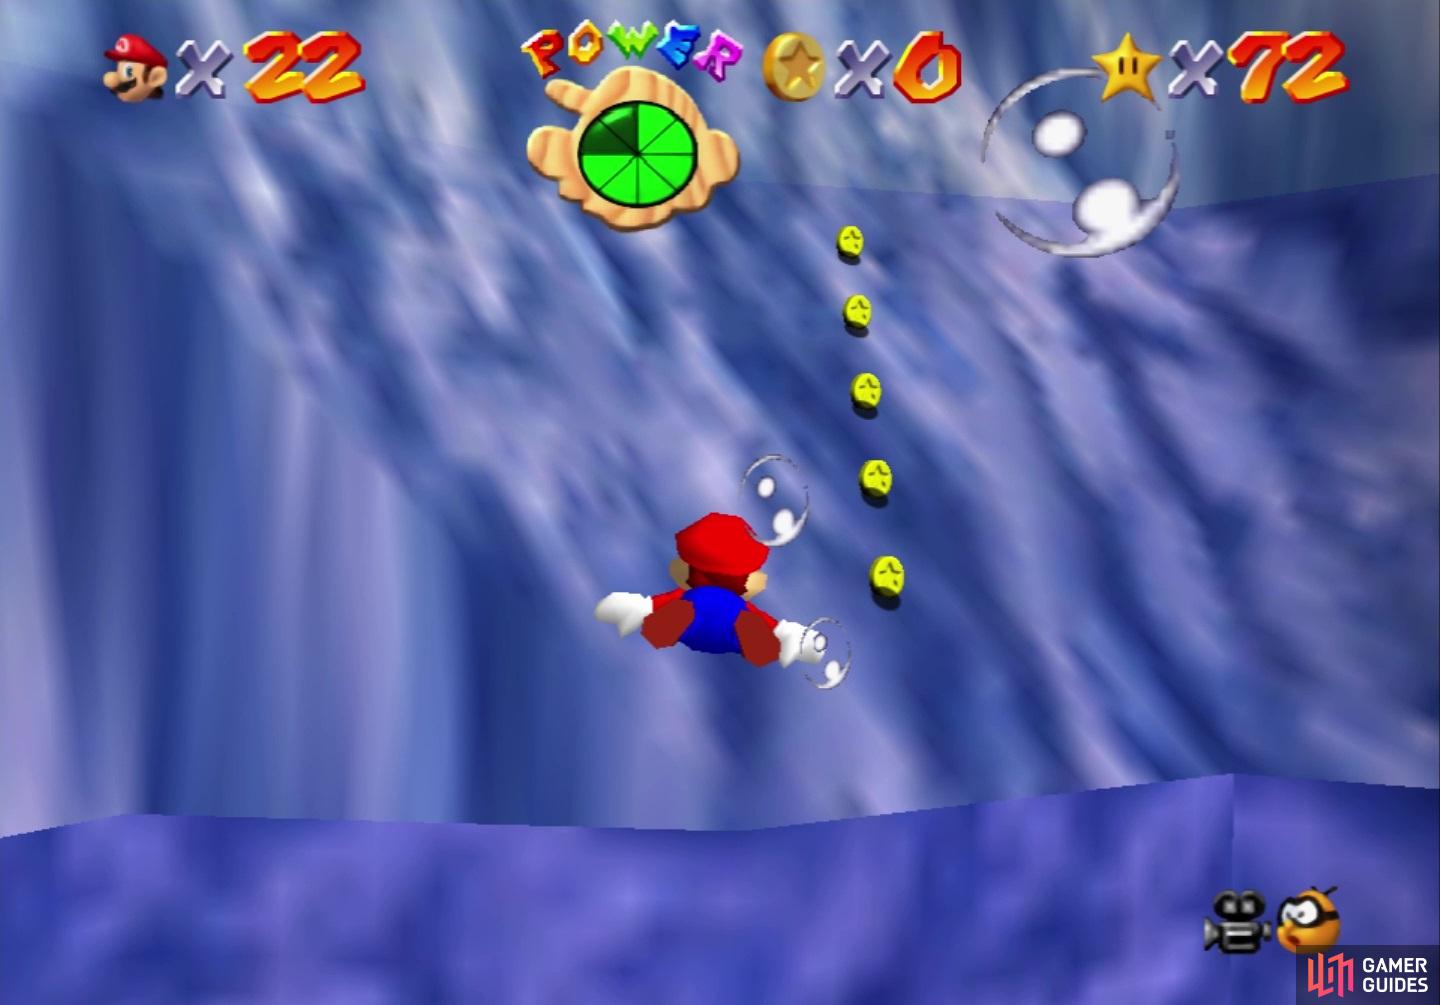 There are five coins located on a slope near the top of the first area